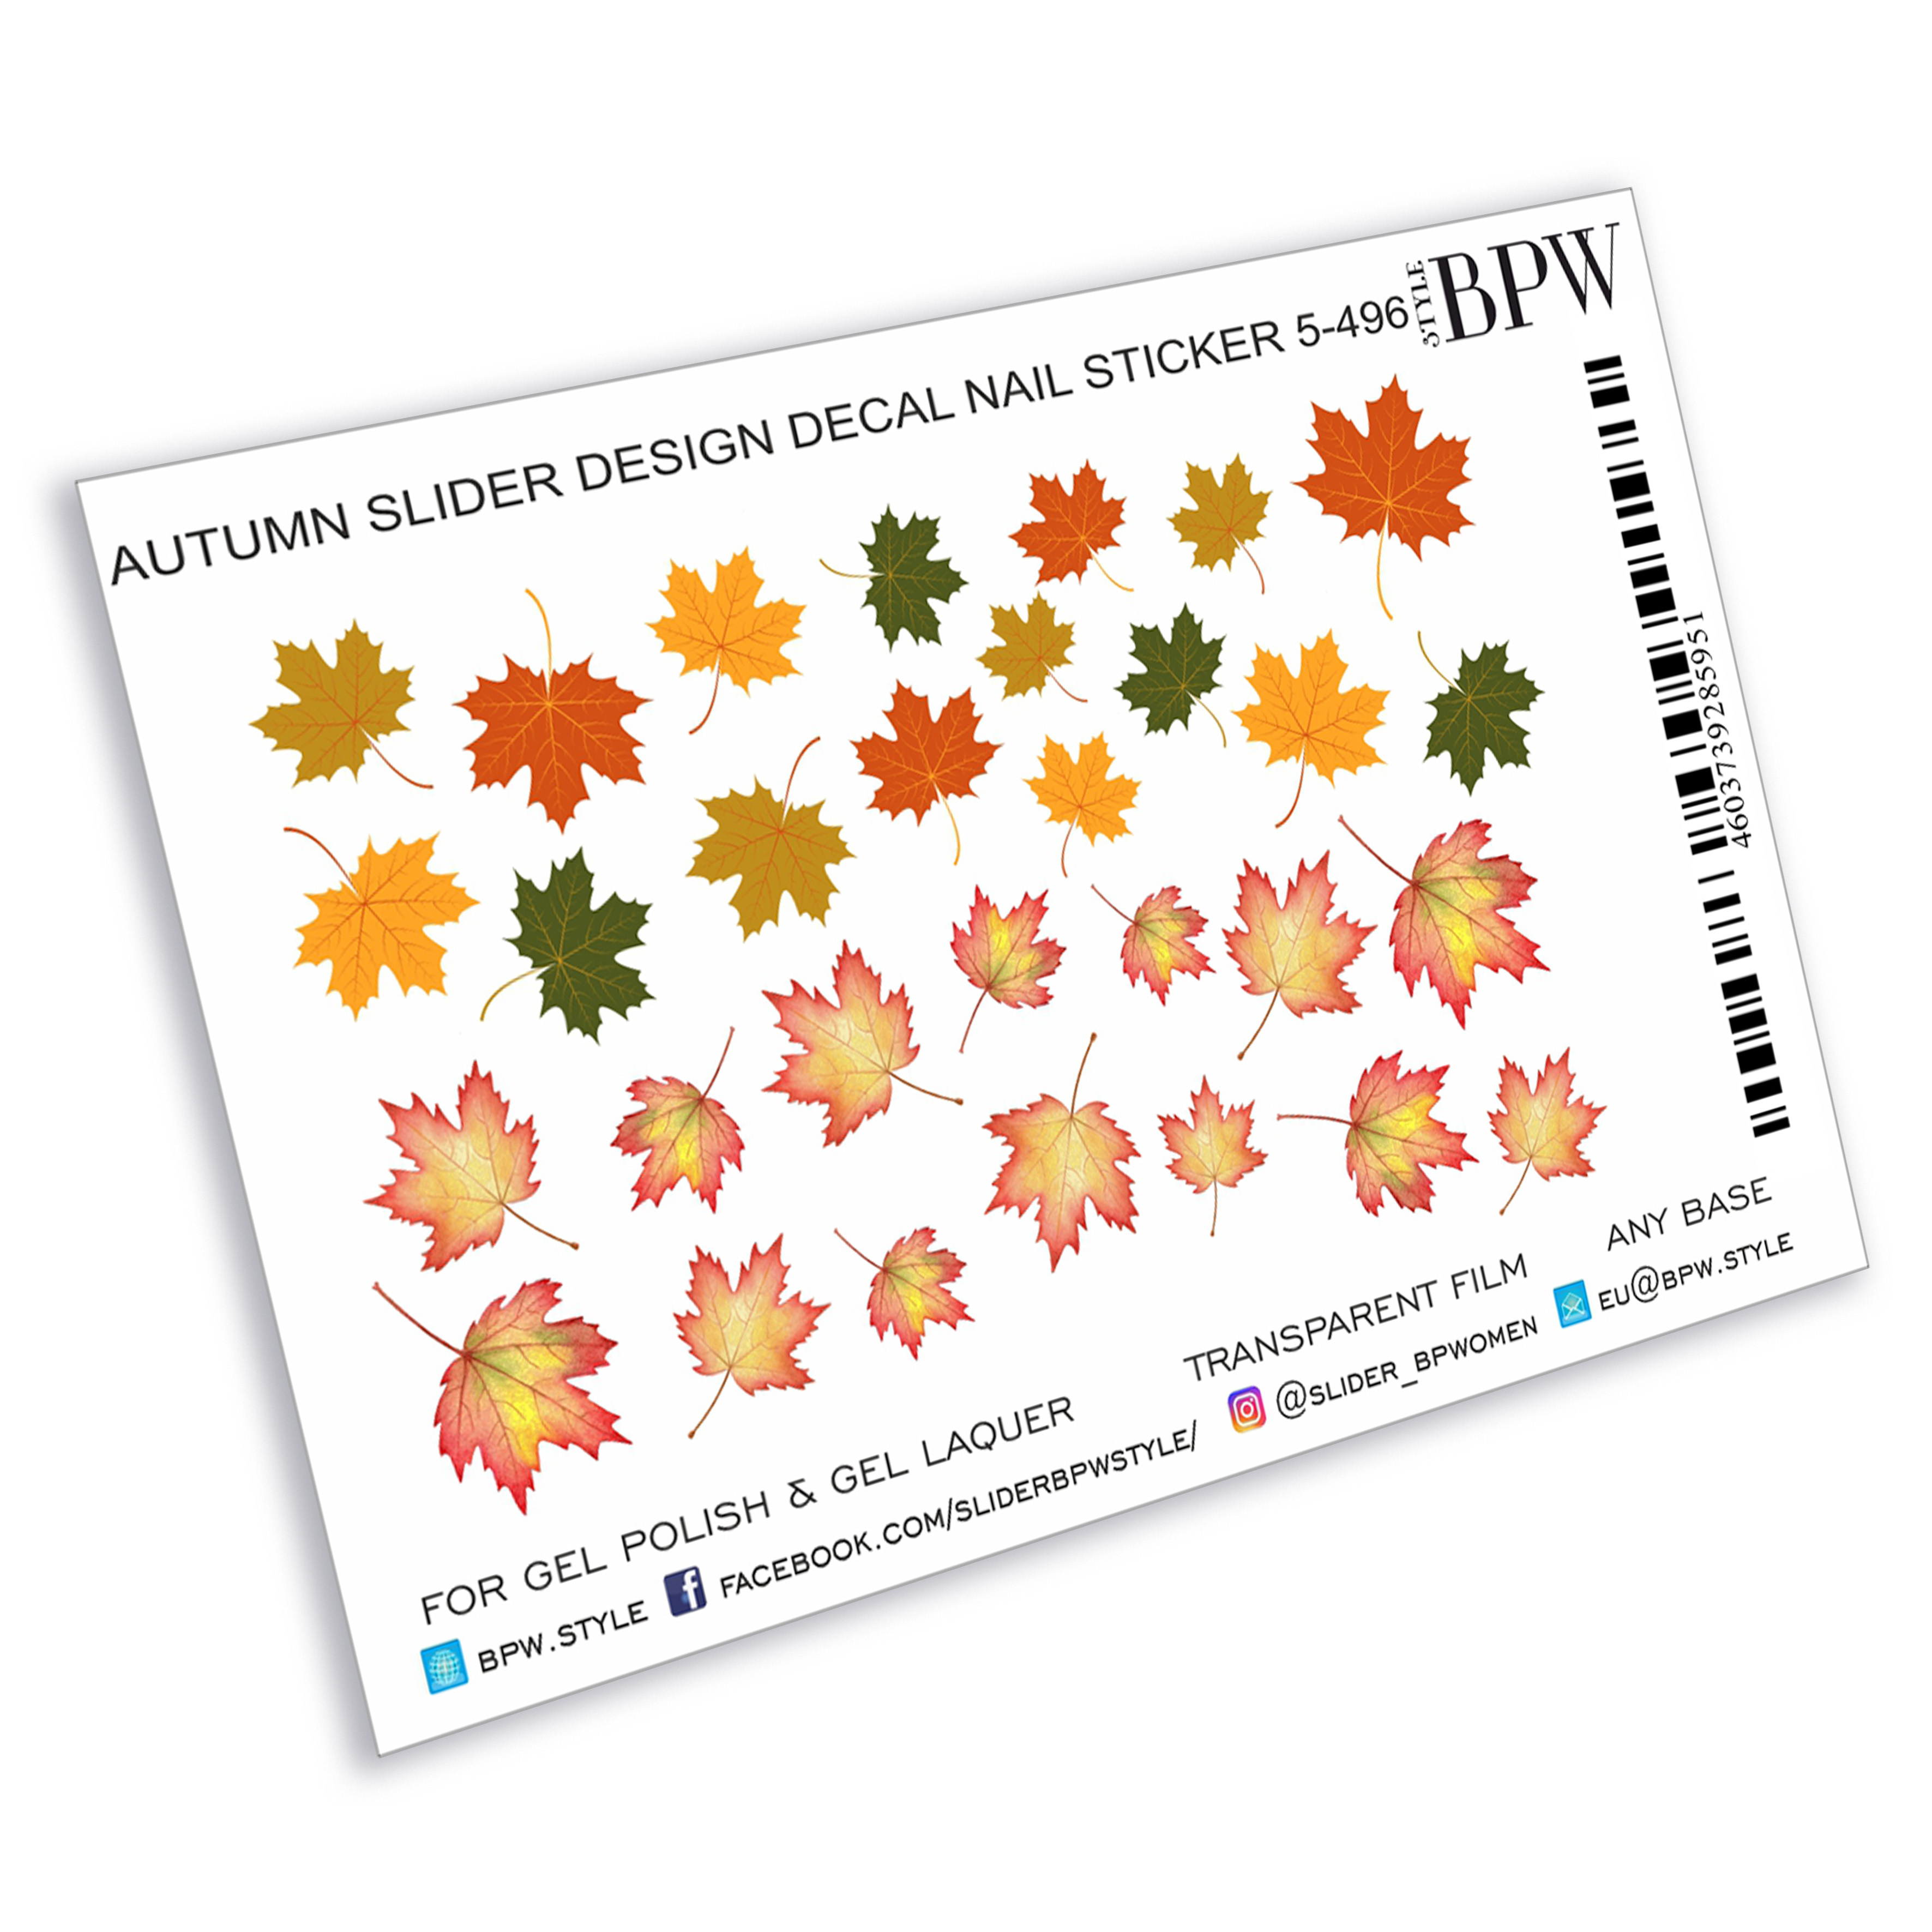 Decal nail sticker Maple leaves